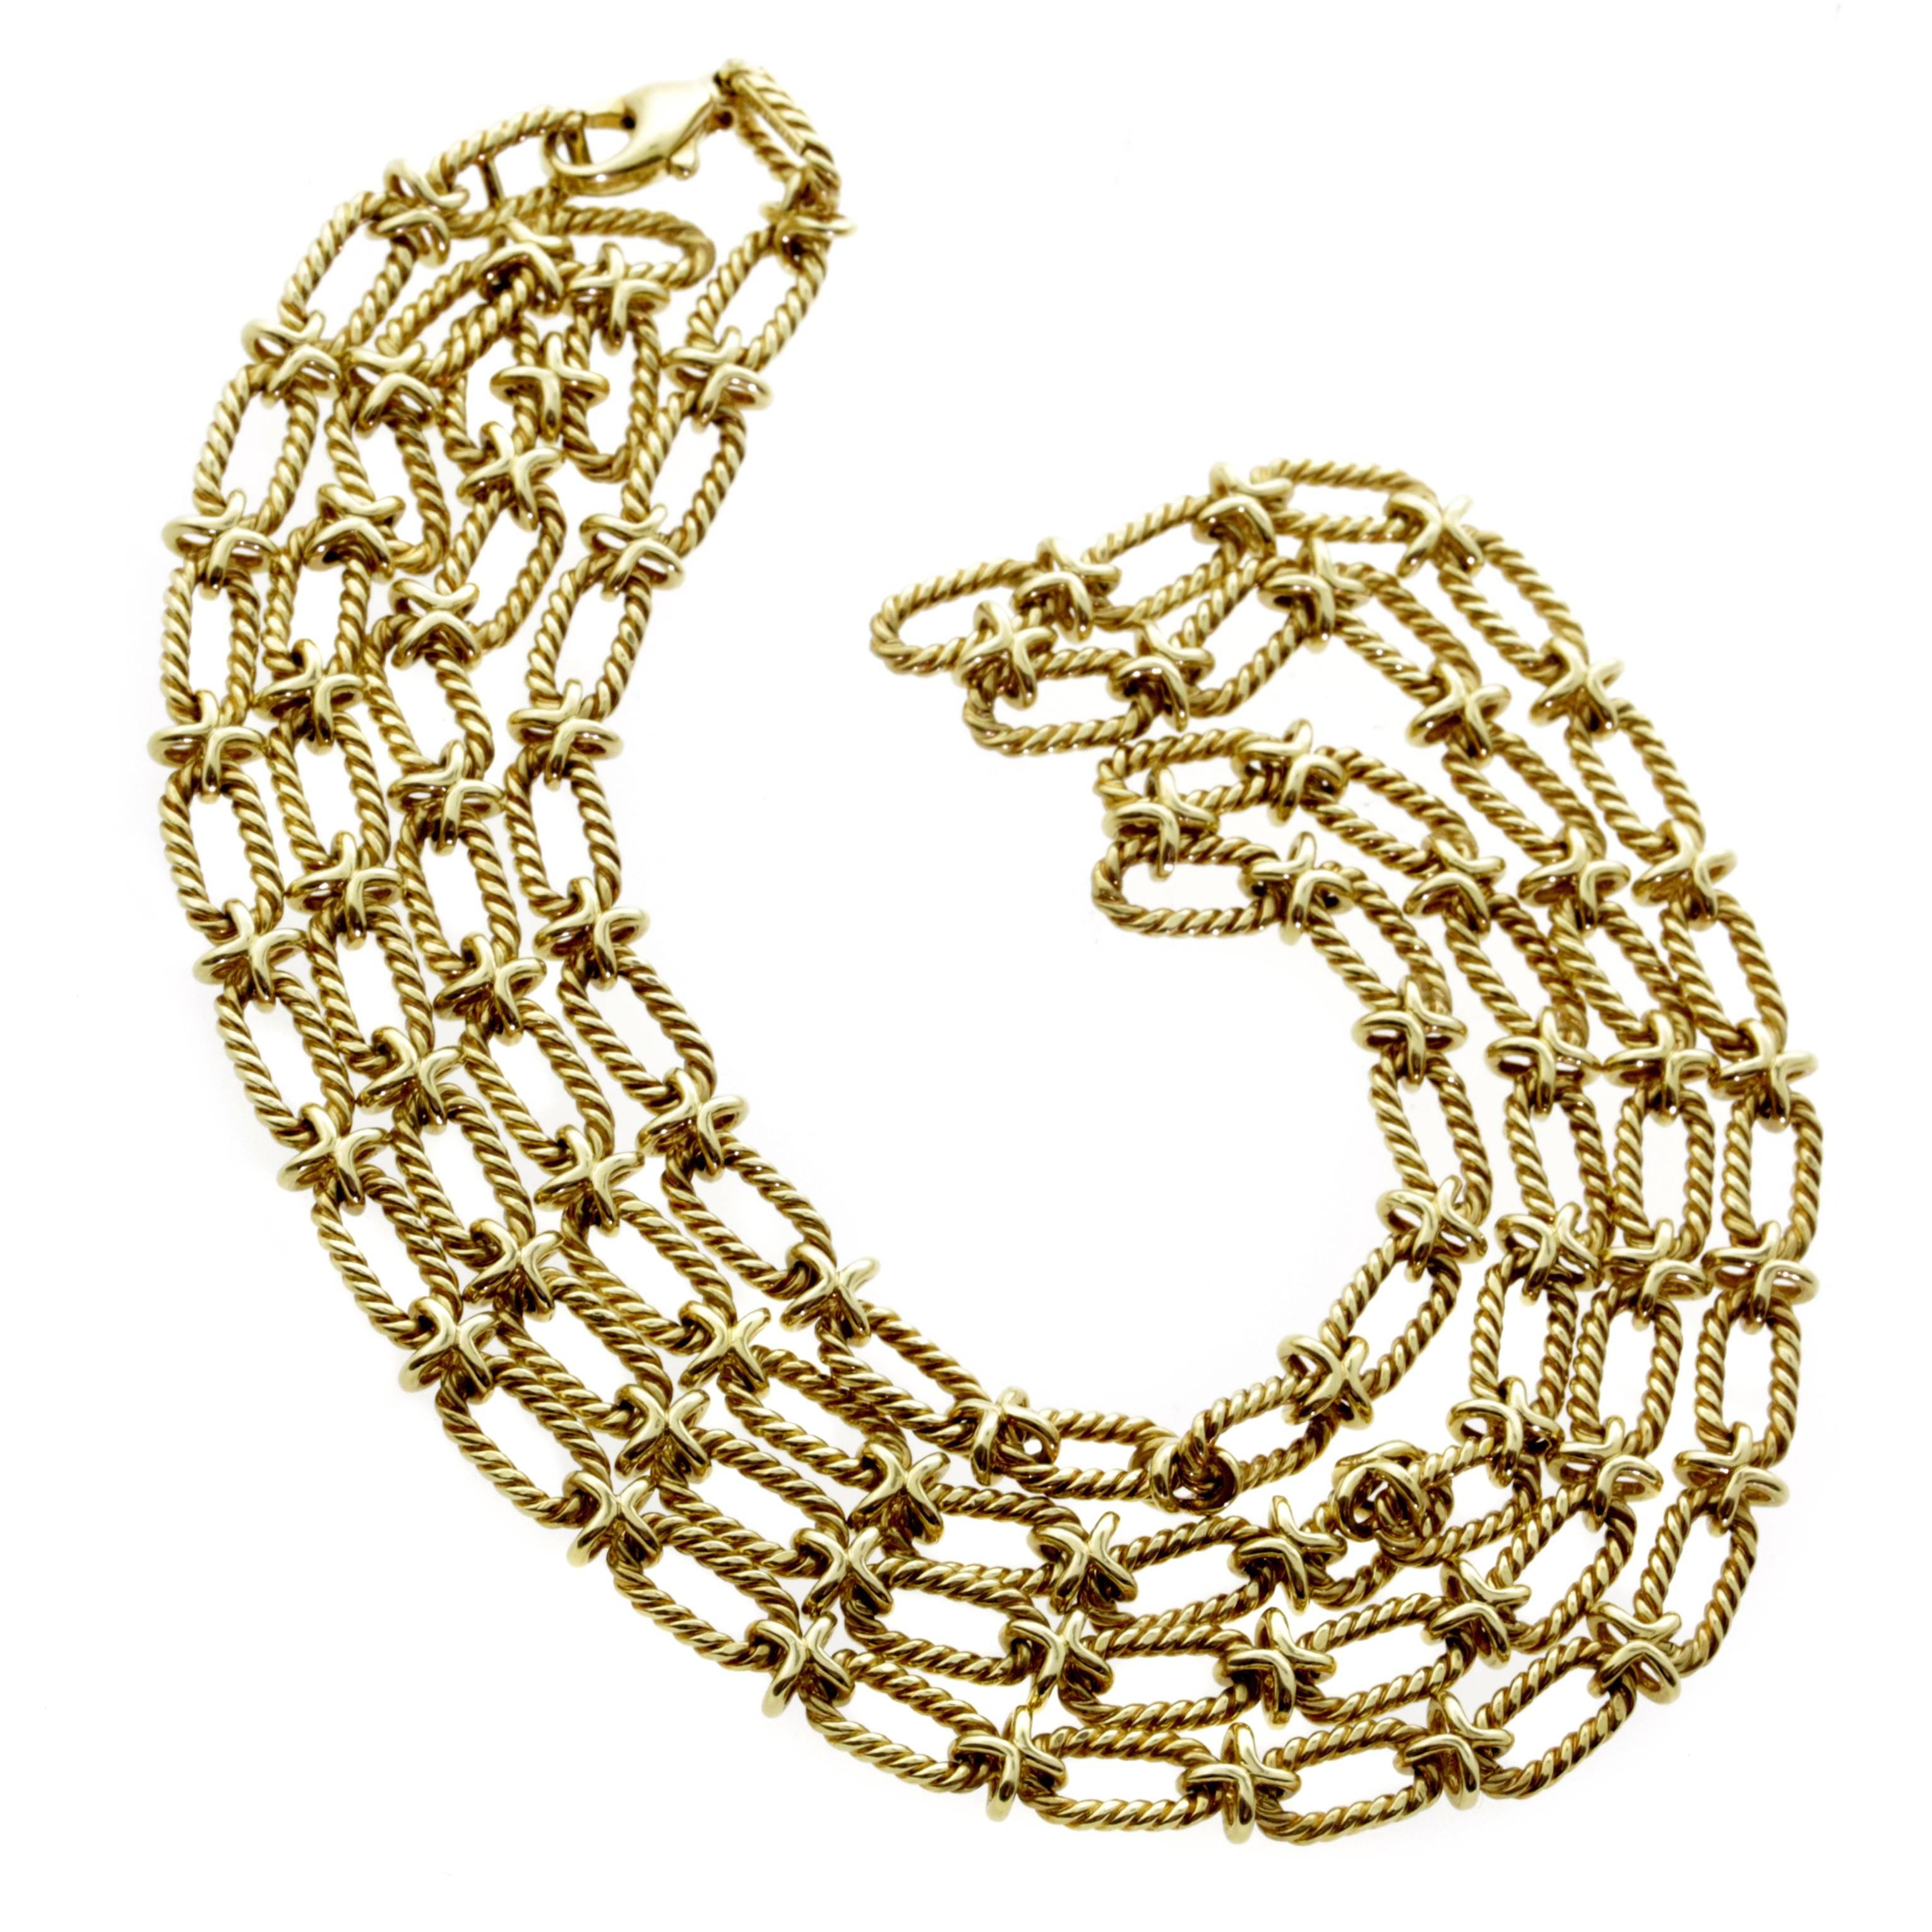 Tiffany & Co. Woven Gold Sautoir Necklace im Zustand „Hervorragend“ in Feasterville, PA